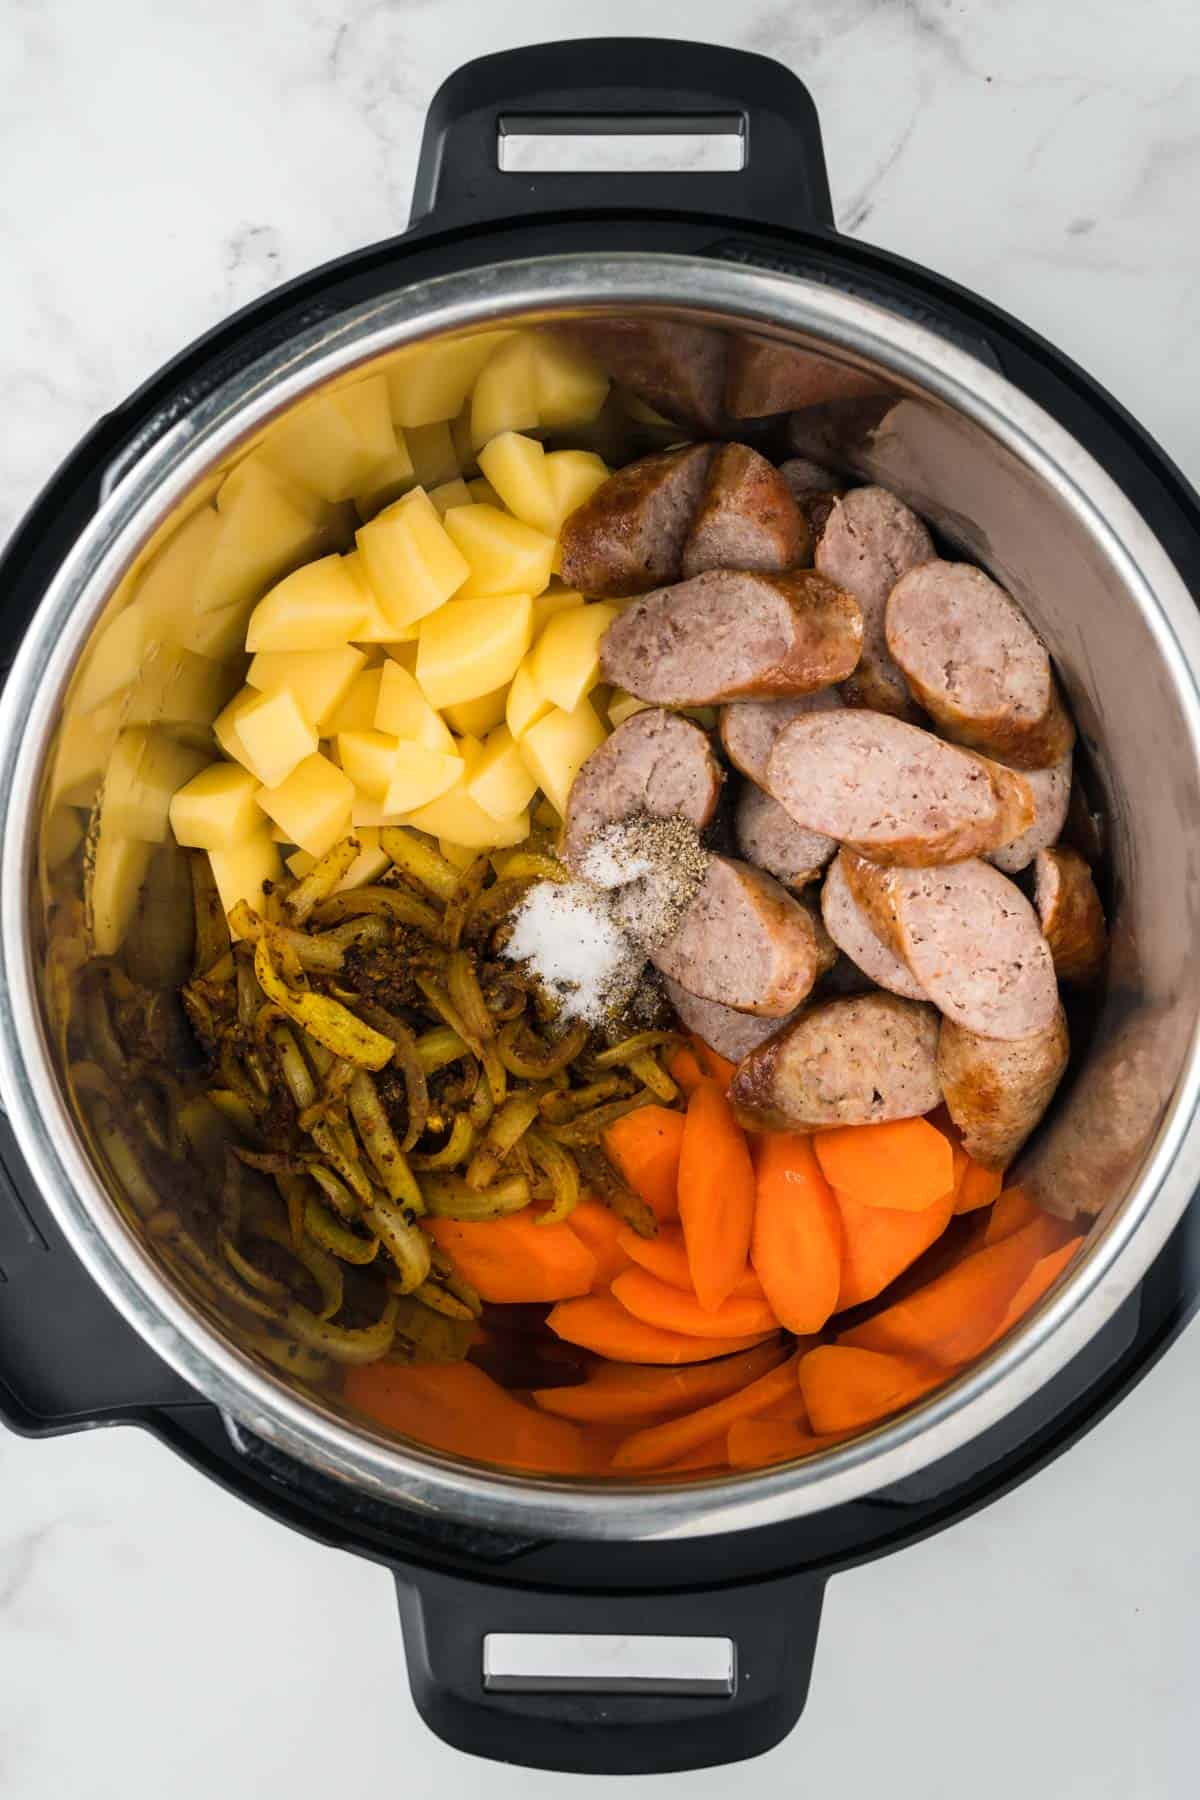 Ingredients for curried sausages added to Instant Pot.